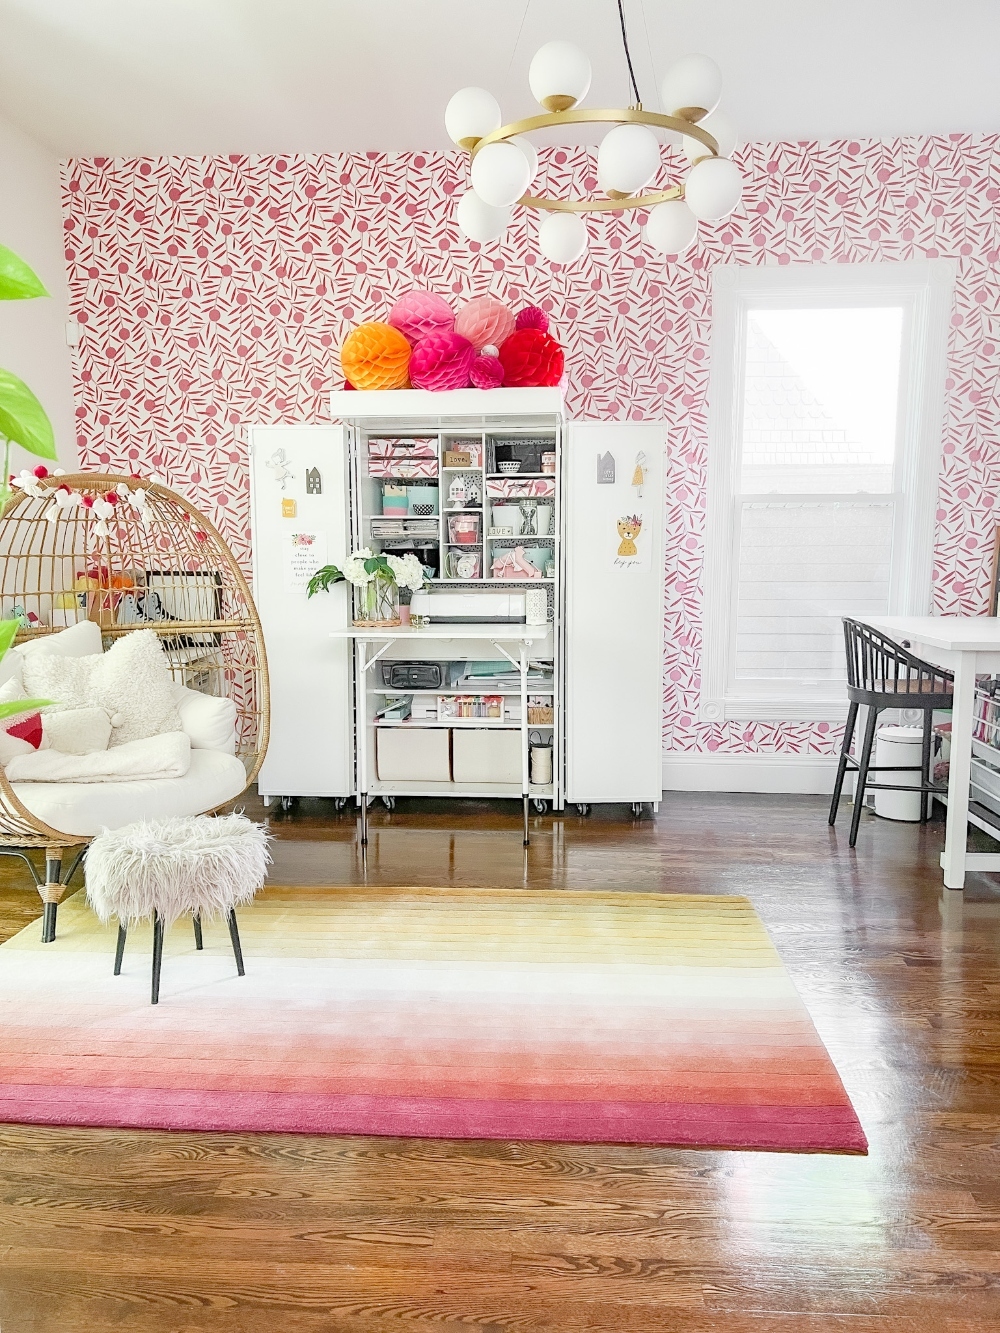 Colorful Cottage Summer Tour. Add some summer color to your home with these easy bright ideas!